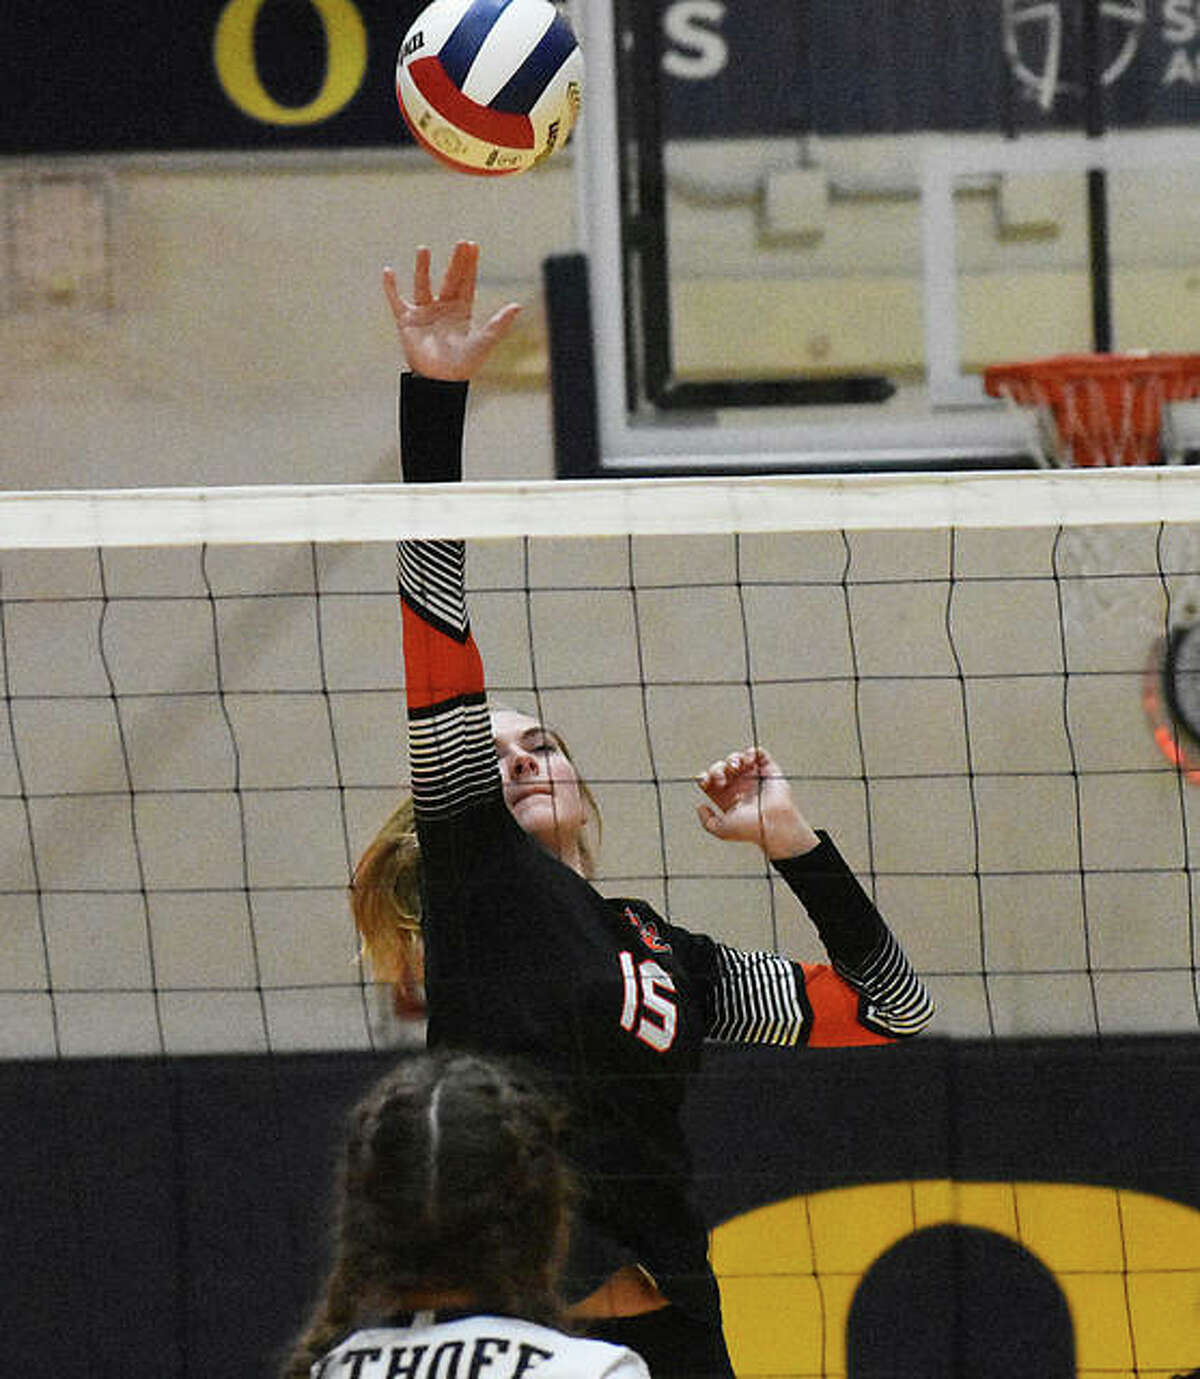 Edwardsville senior Lexie Curtis tips the ball over the net in the first game against Althoff.